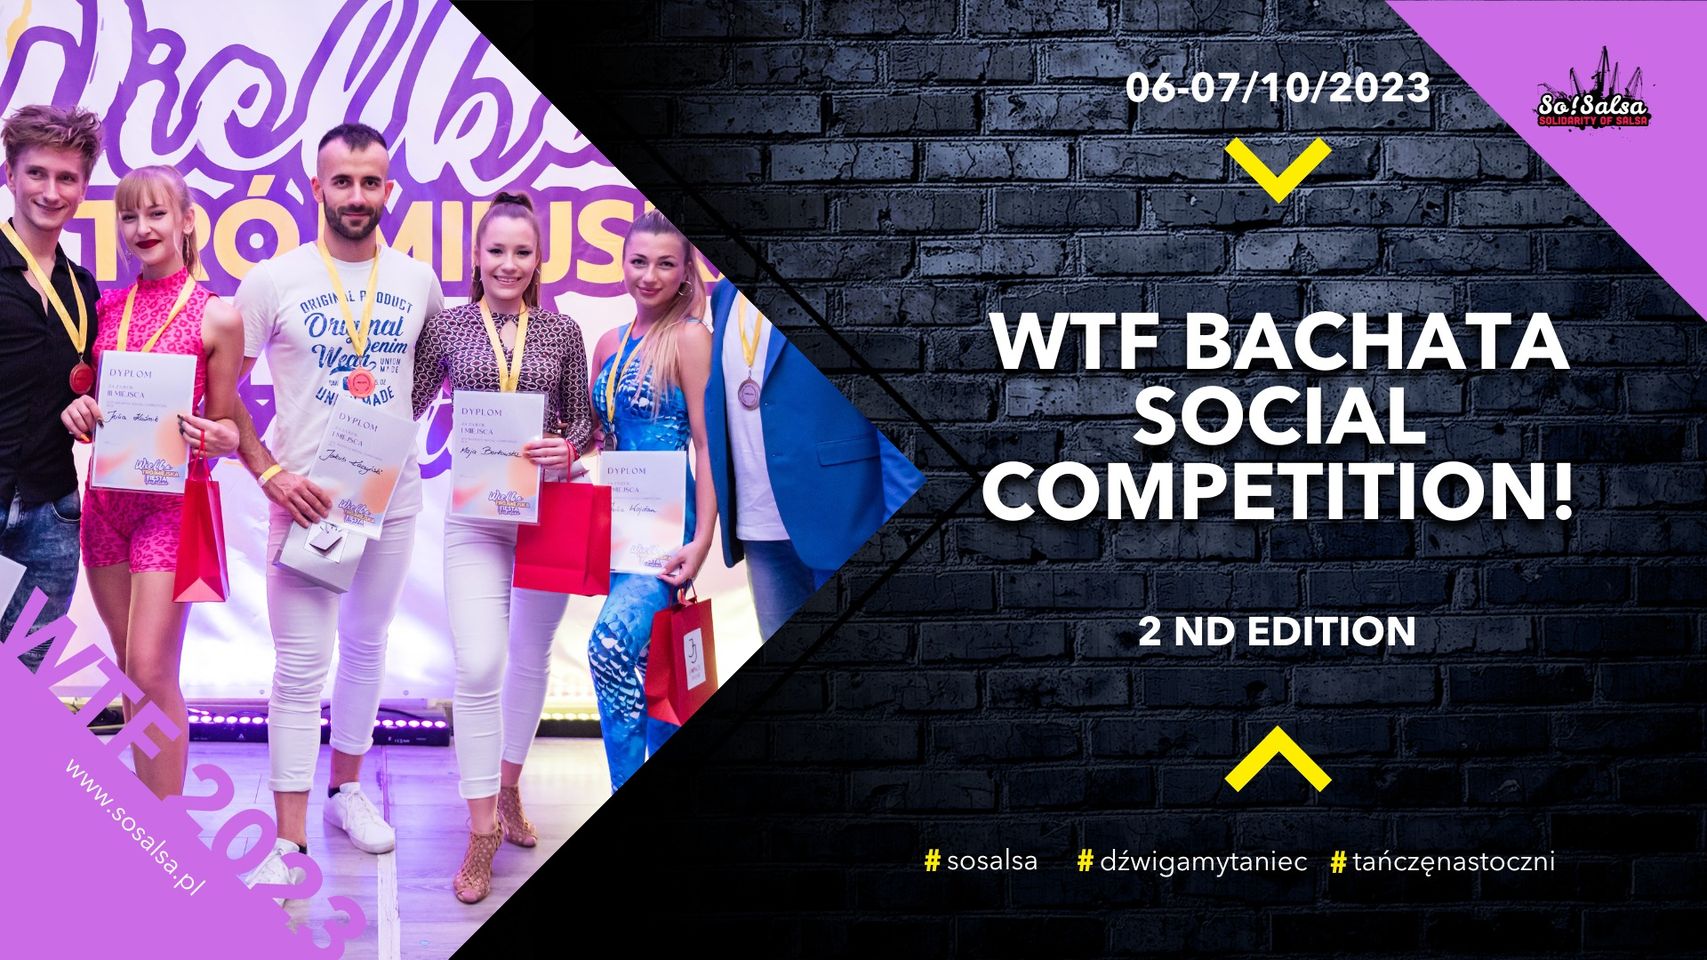 WTF BACHATA SOCIAL COMPETITION 2 ND EDITION